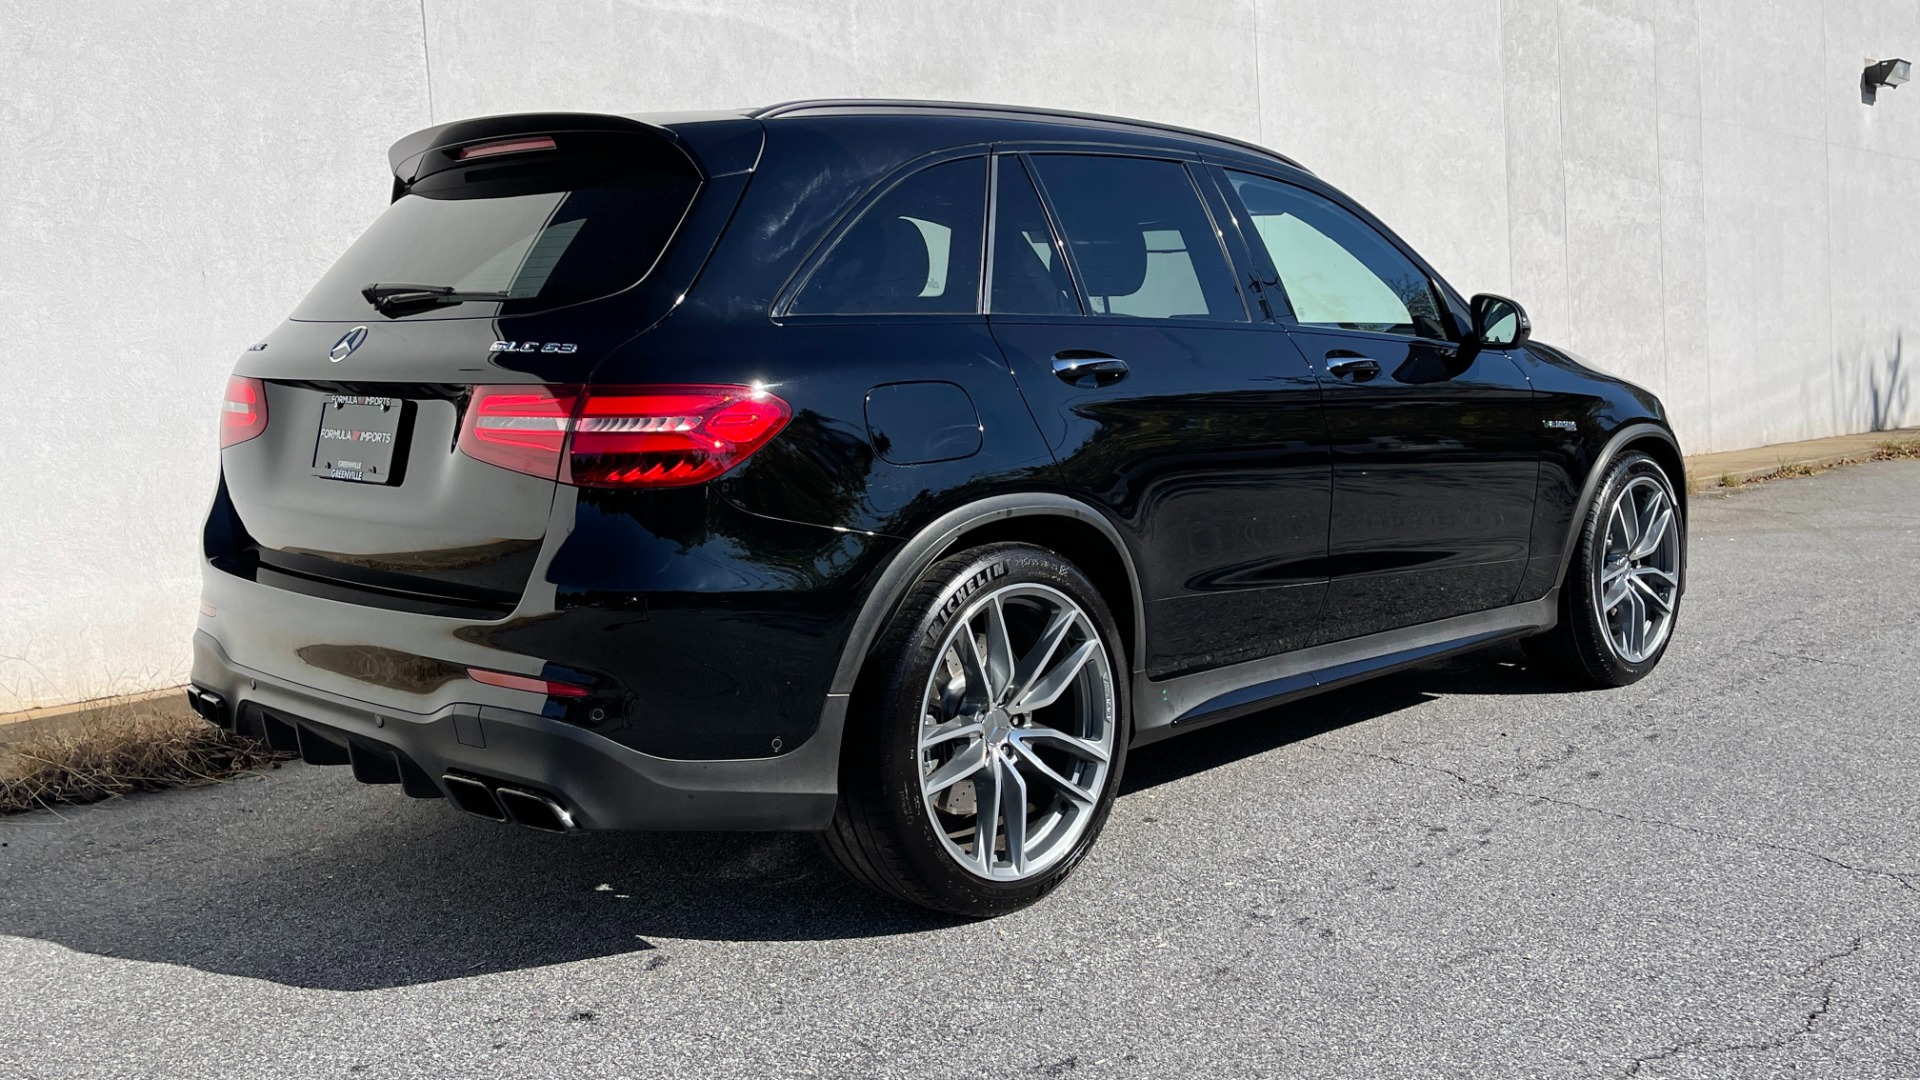 Used 2019 Mercedes-Benz GLC AMG GLC 63 / DRIVER ASSIST / AMG EXHAUST / CARBON FIBER / MULTIMEDIA for sale $61,995 at Formula Imports in Charlotte NC 28227 7